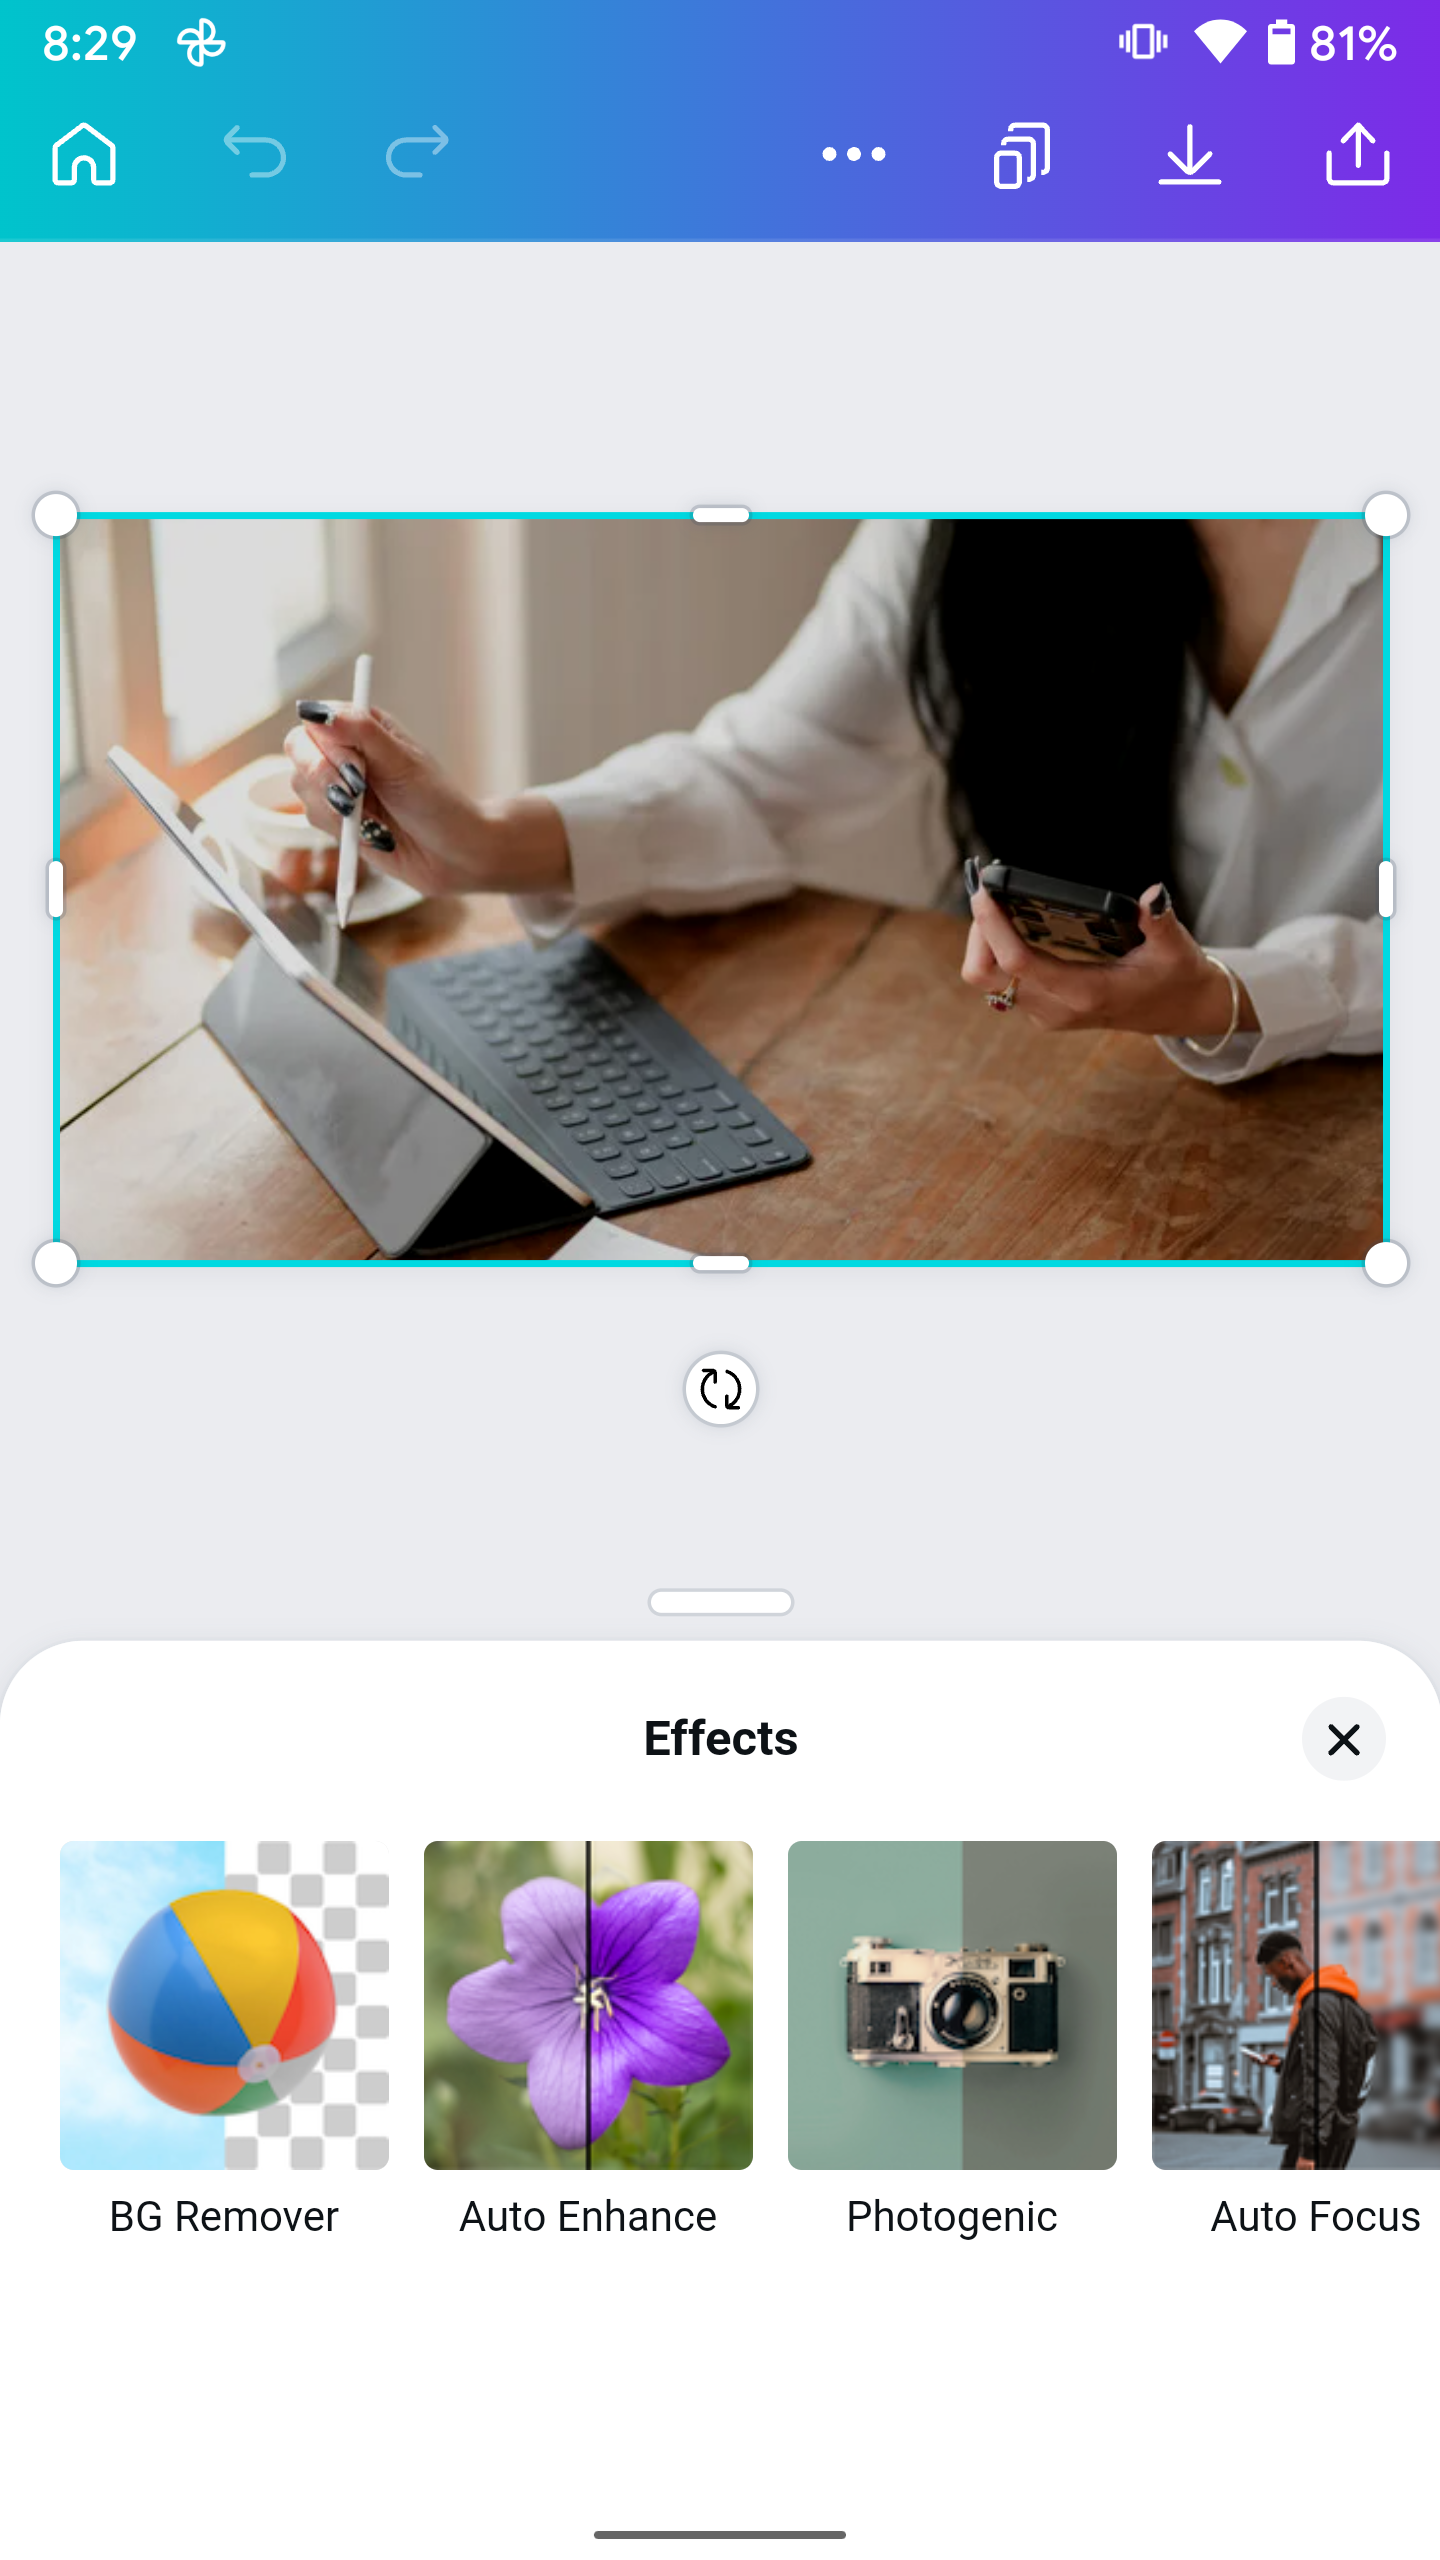 A screenshot of Canva showing the effects options.